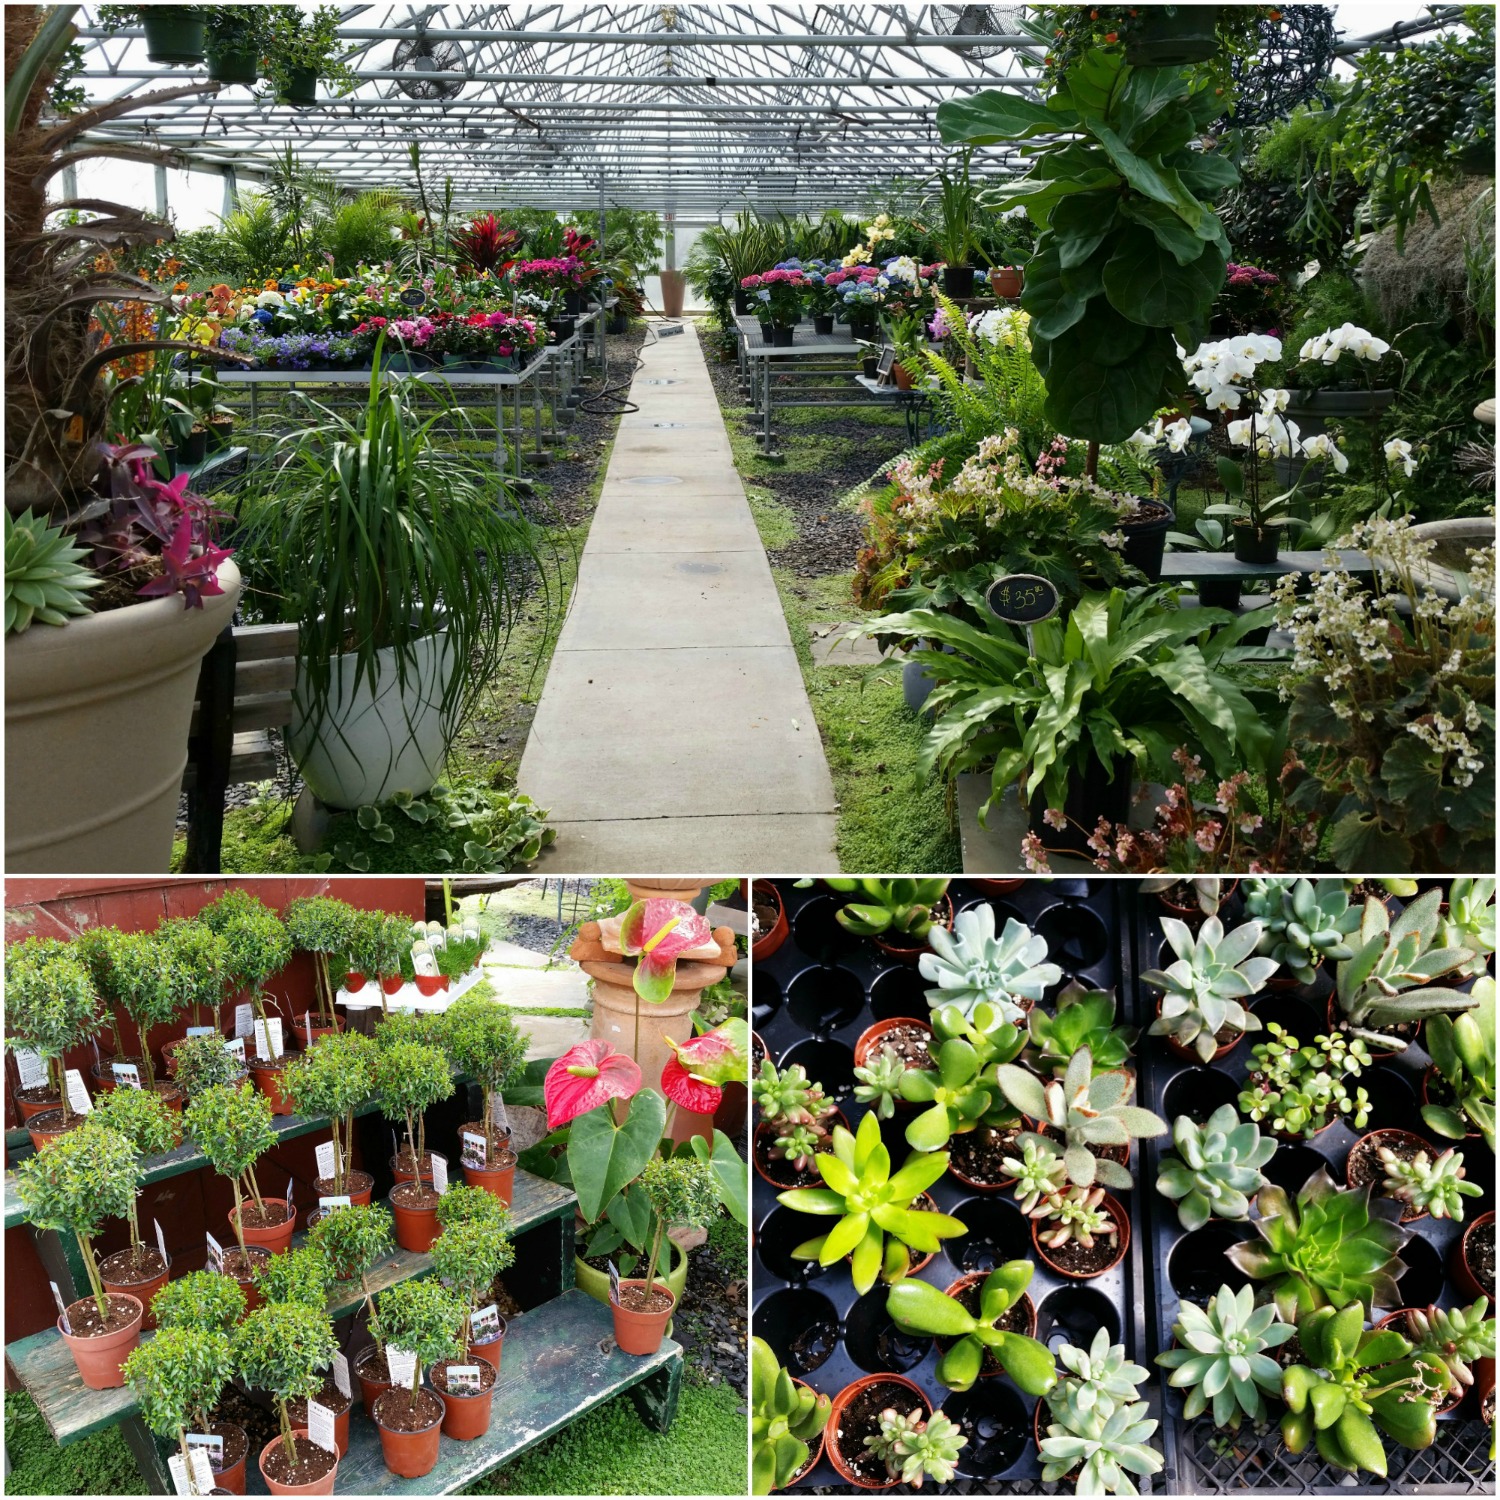 Robertson's Greenhouse of Spring Plants